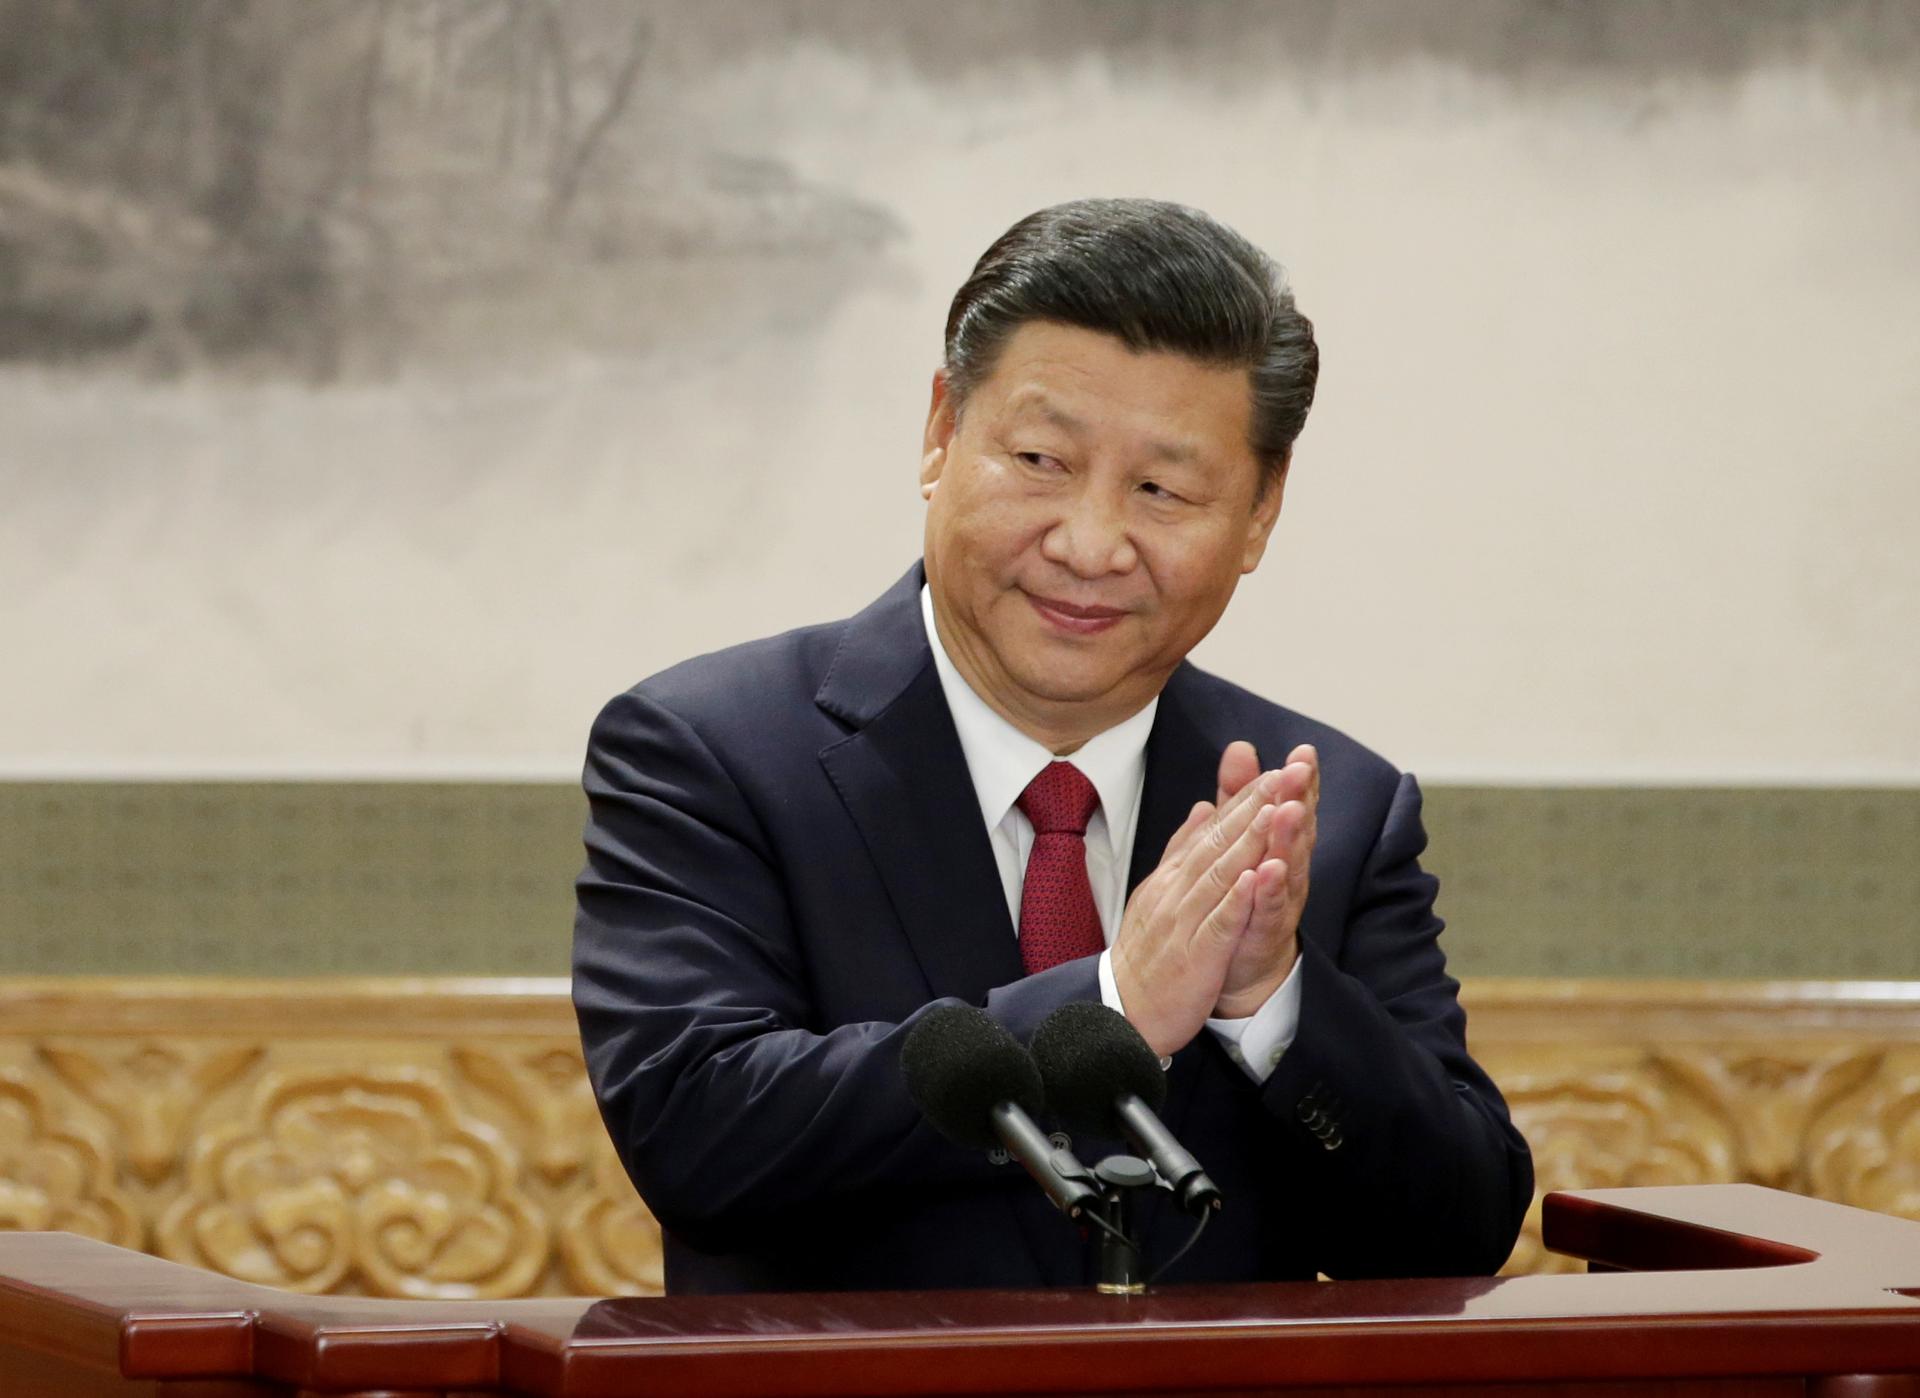 China's President Xi Jinping claps after his speech as he and other new Politburo Standing Committee members meet with the press at the Great Hall of the People in Beijing, Oct. 25, 2017.